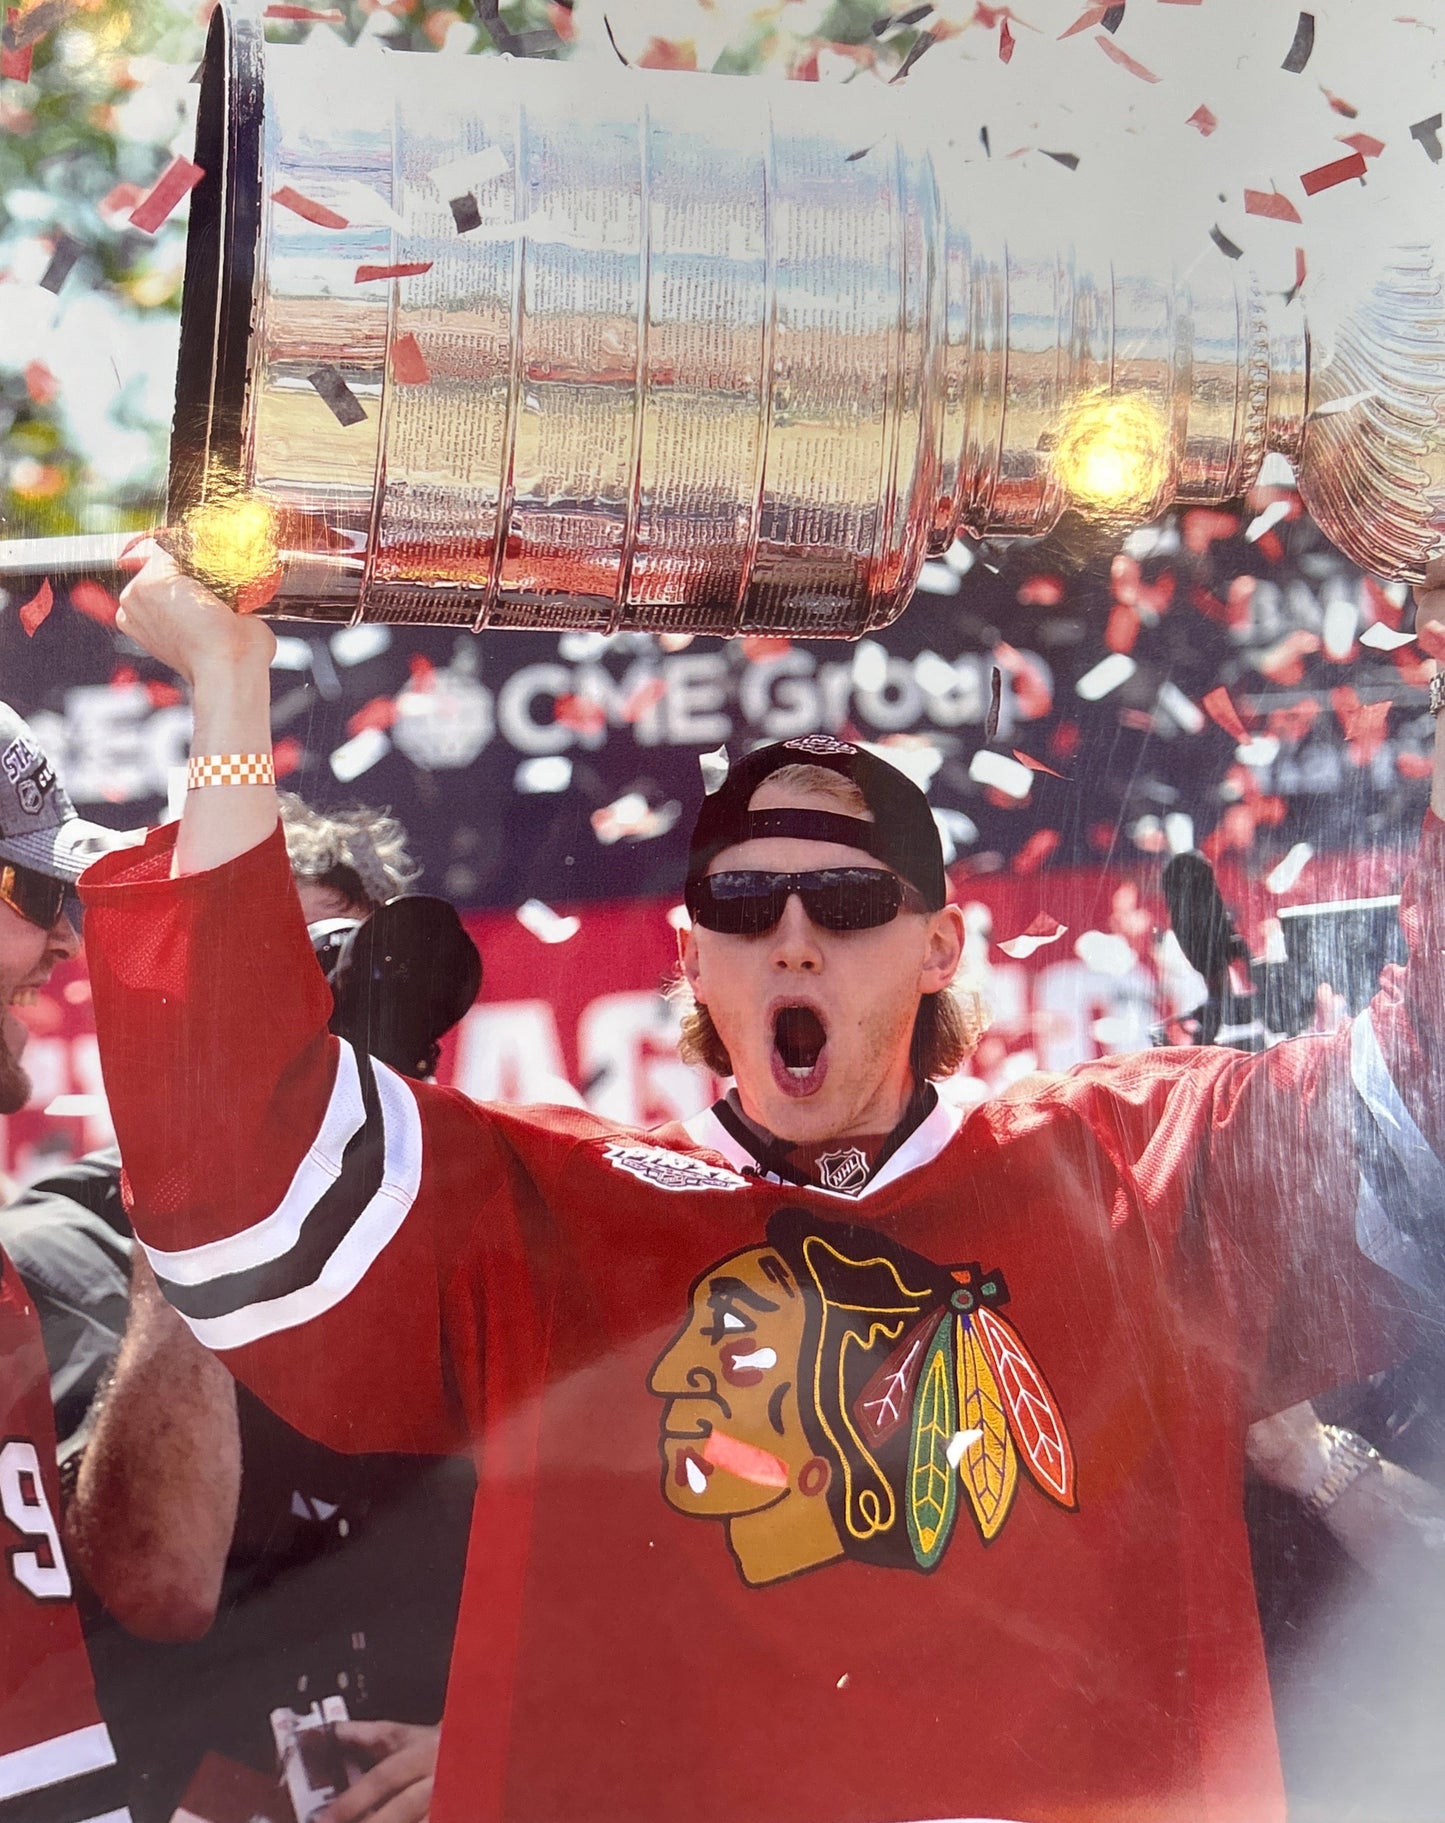 Patrick Kane 2013 Stanley Cup Champions Parade Chicago Blackhawks Action Photo (8X10)